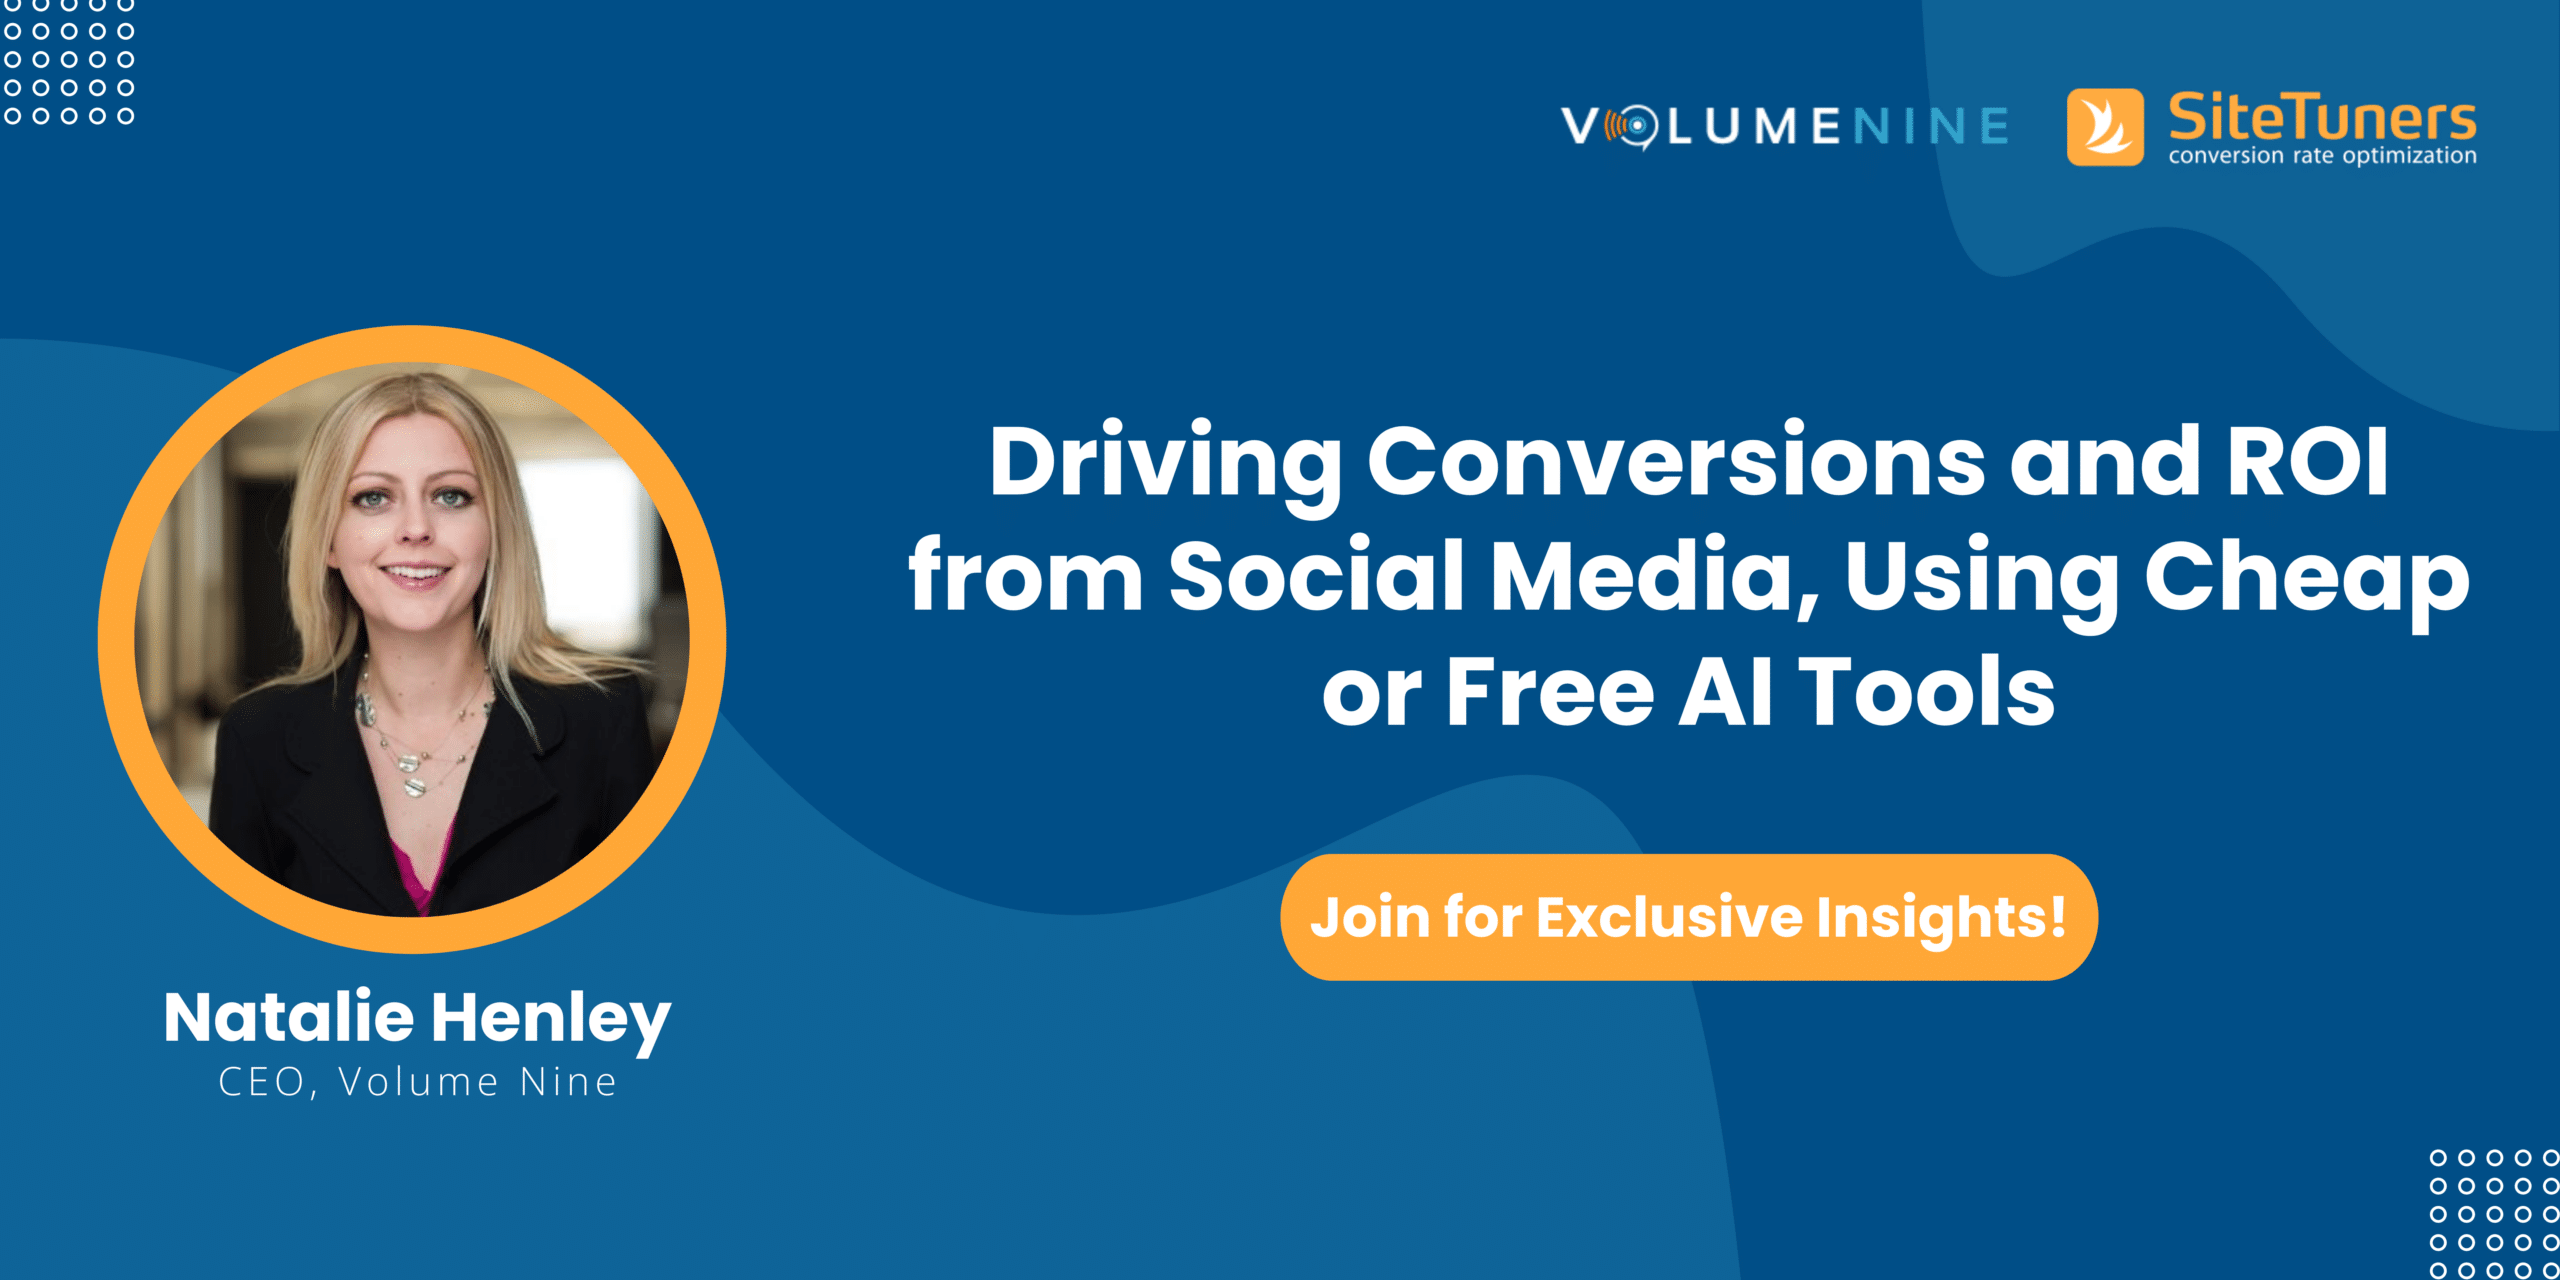 Driving Conversions and ROI from Social Media, Using Cheap or Free AI Tools